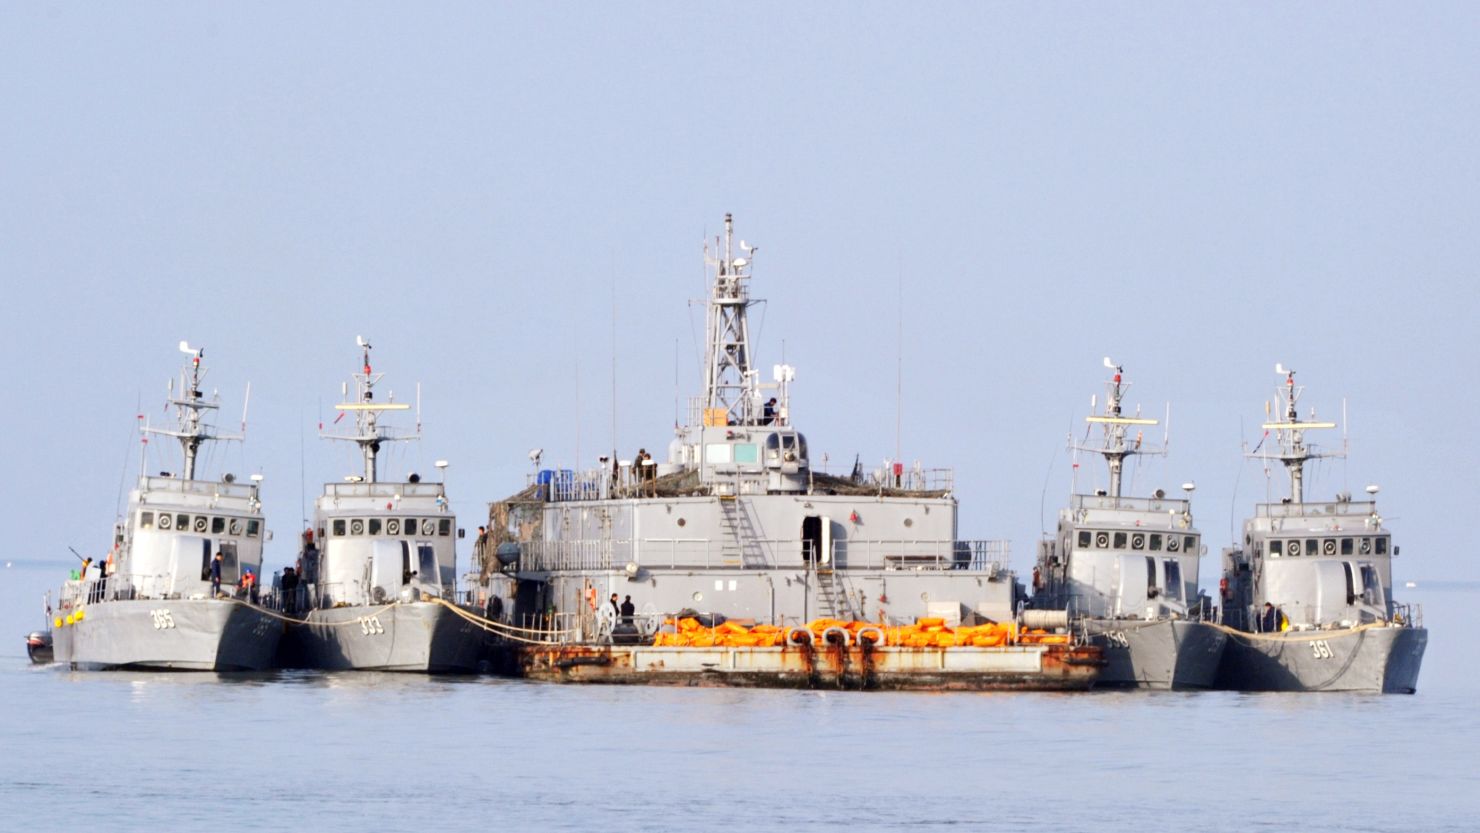 South Korean Navy vessels berthed off the South Korea-controlled island of Yeonpyeong near the disputed waters of the Yellow Sea on December 22, 2010.